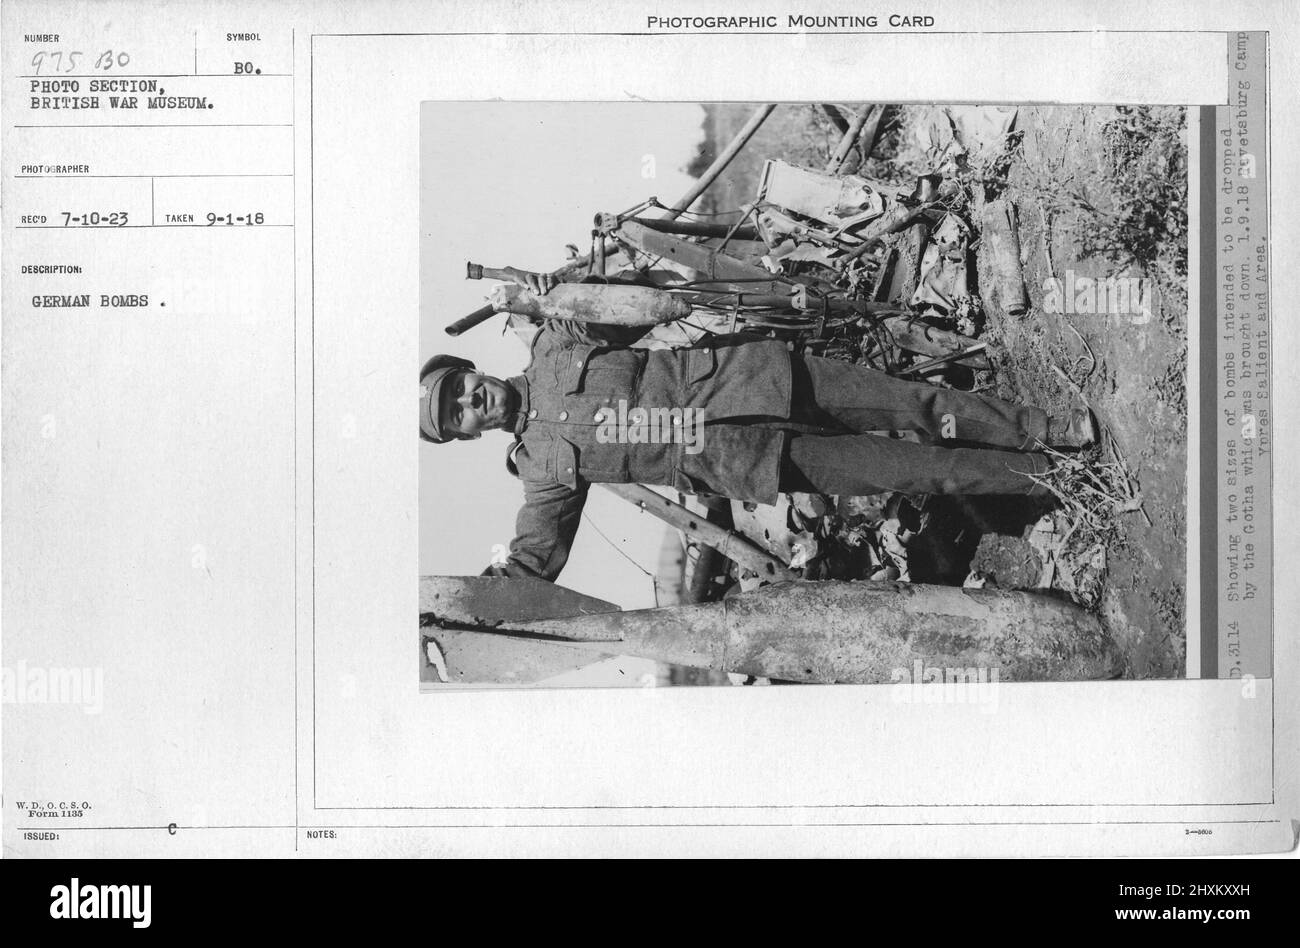 German bombs. Collection of World War I Photographs, 1914-1918 that depict the military activities of British and other nation's armed forces and personnel during World War I. Stock Photo